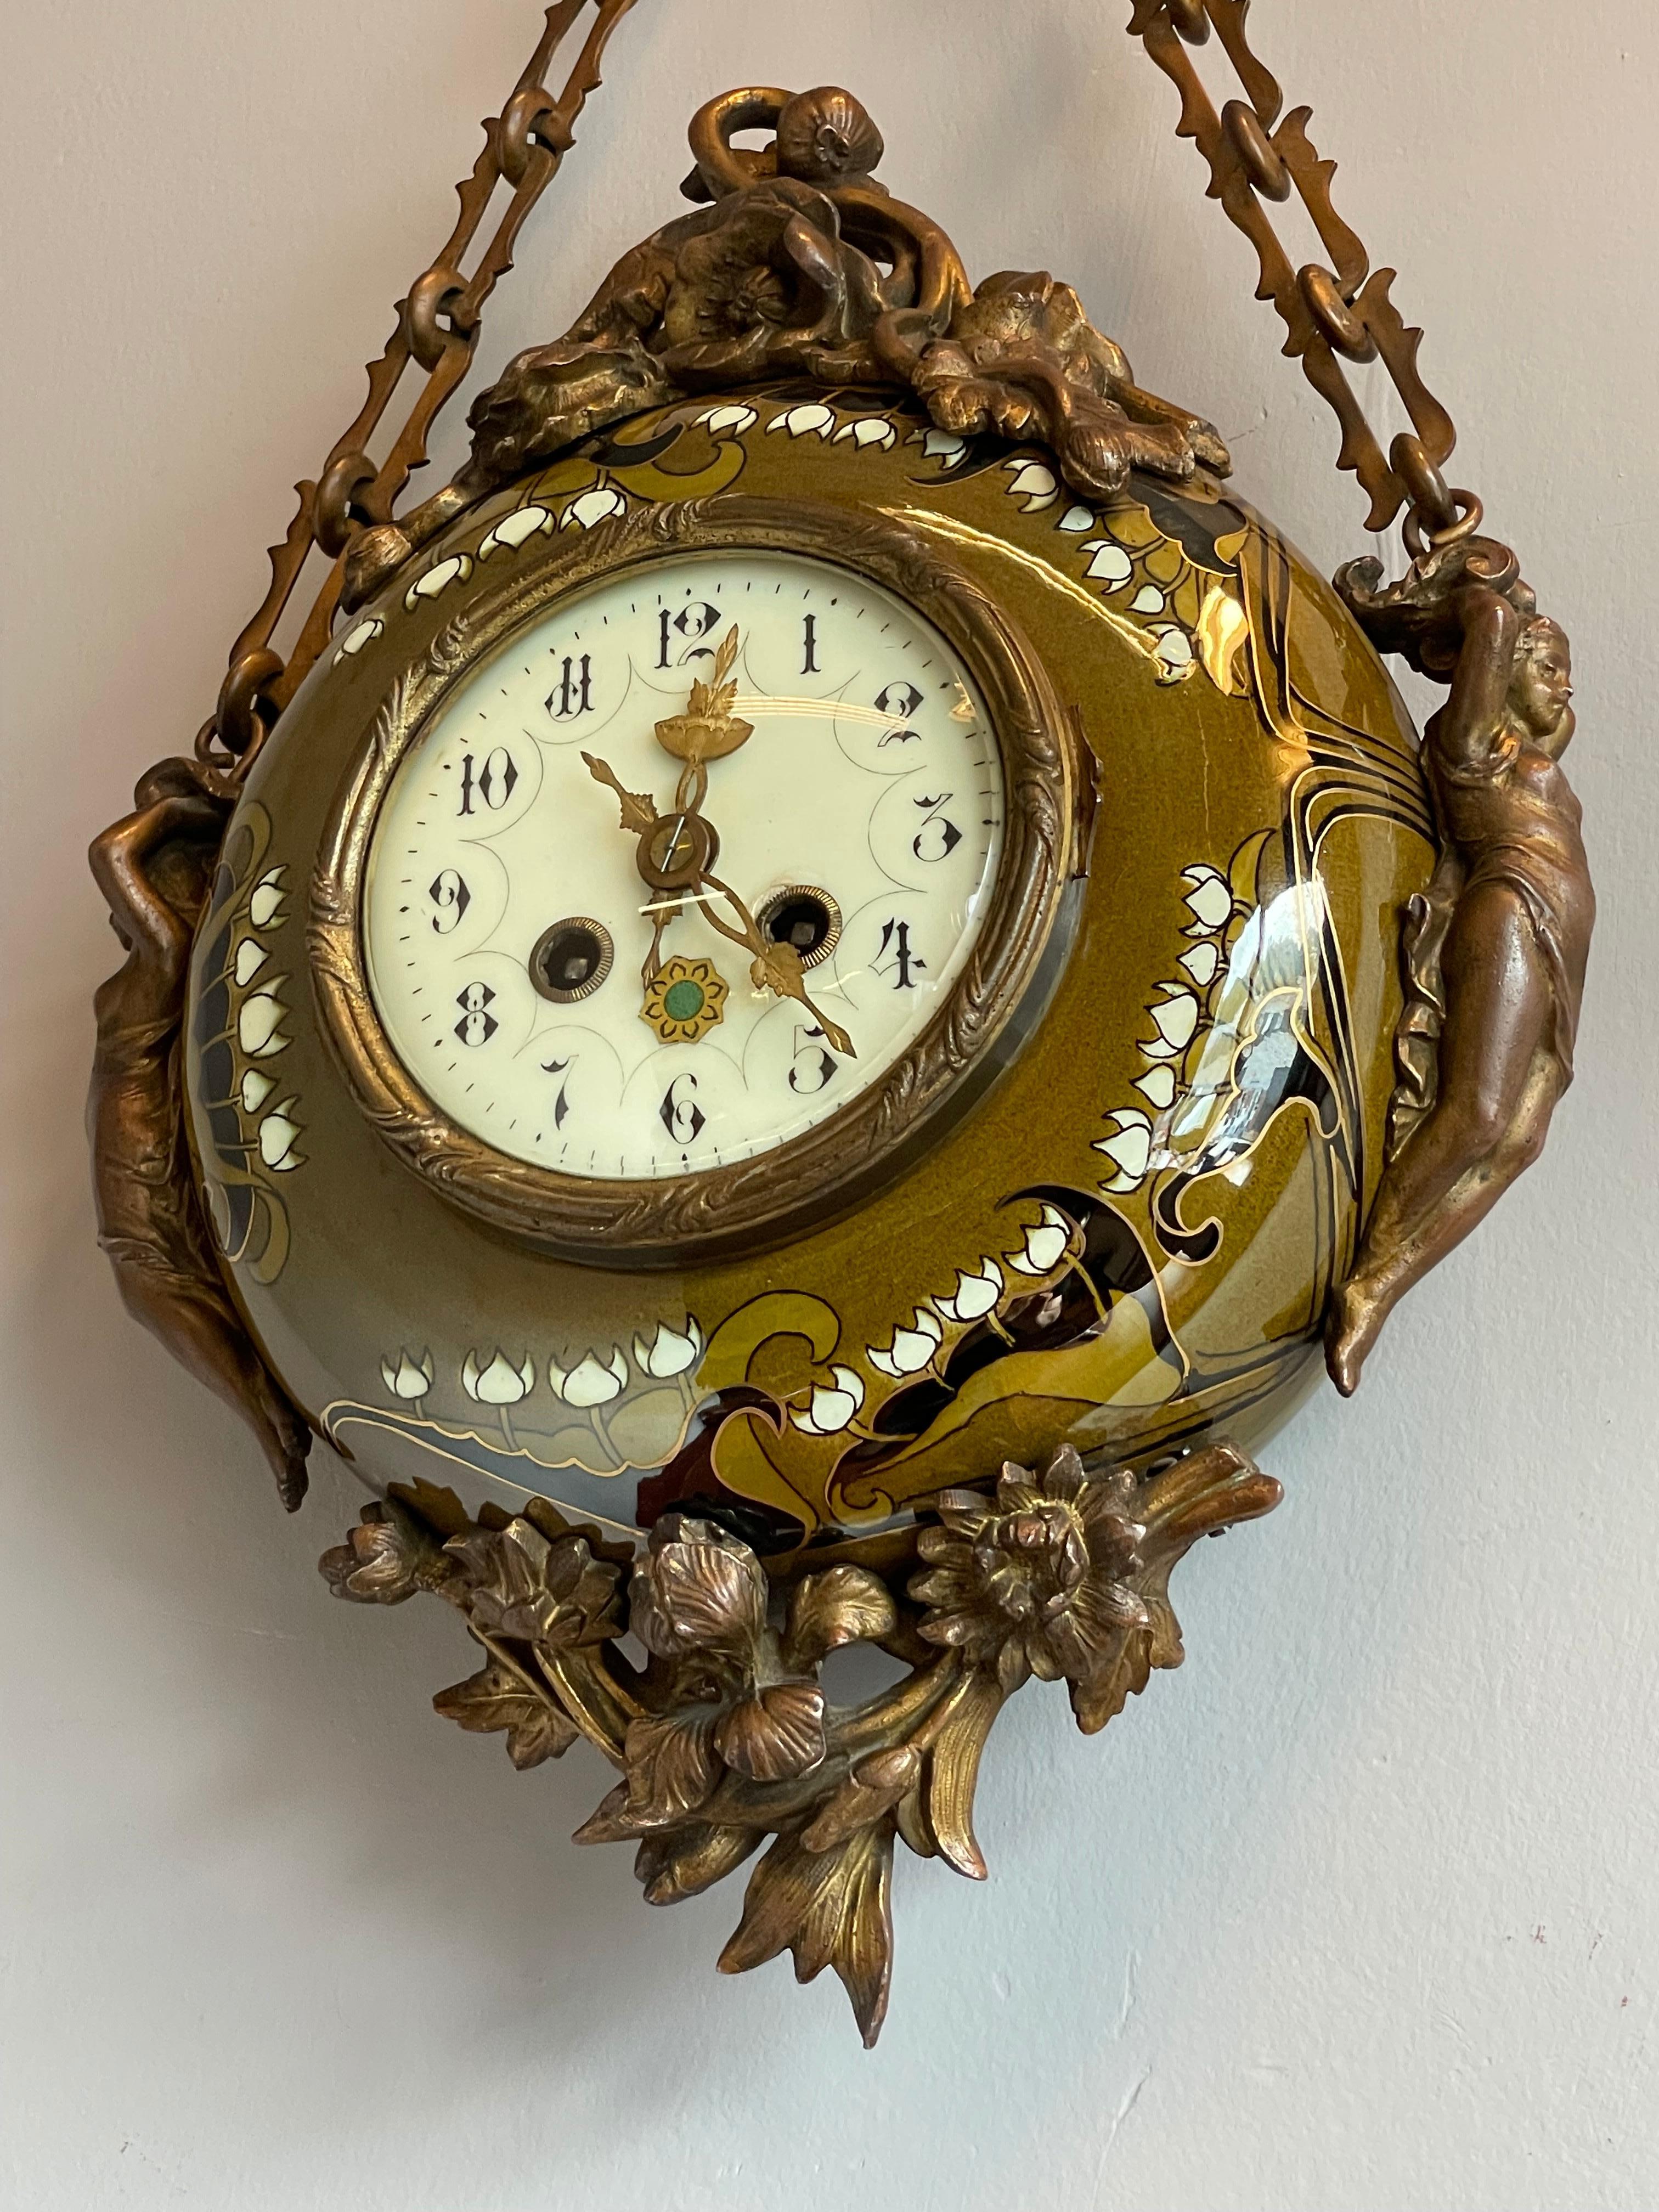 Stunning and perfect running wall clock from the European Art Nouveau and Jugendstil era.

If you like rare Arts and Crafts antiques in general and marvelous clocks in particular then this handcrafted wall clock from circa 1900-1910 could be the